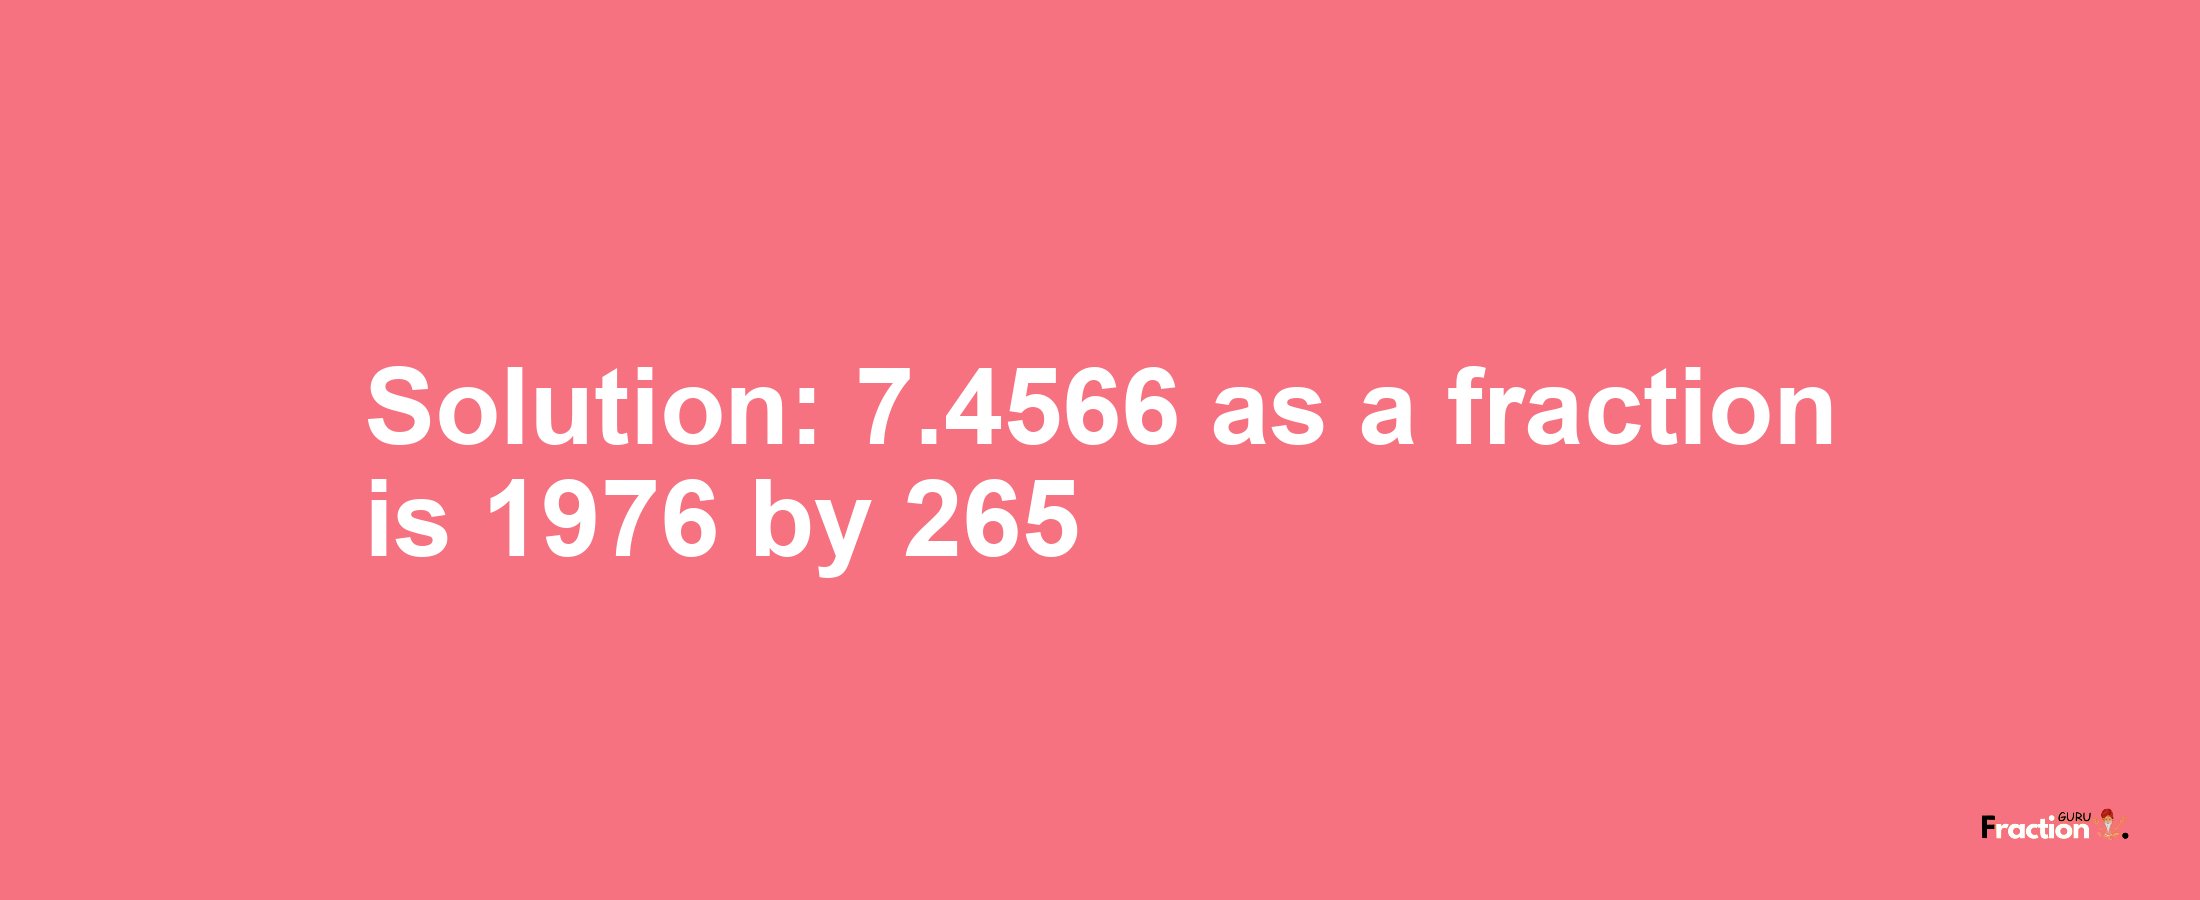 Solution:7.4566 as a fraction is 1976/265